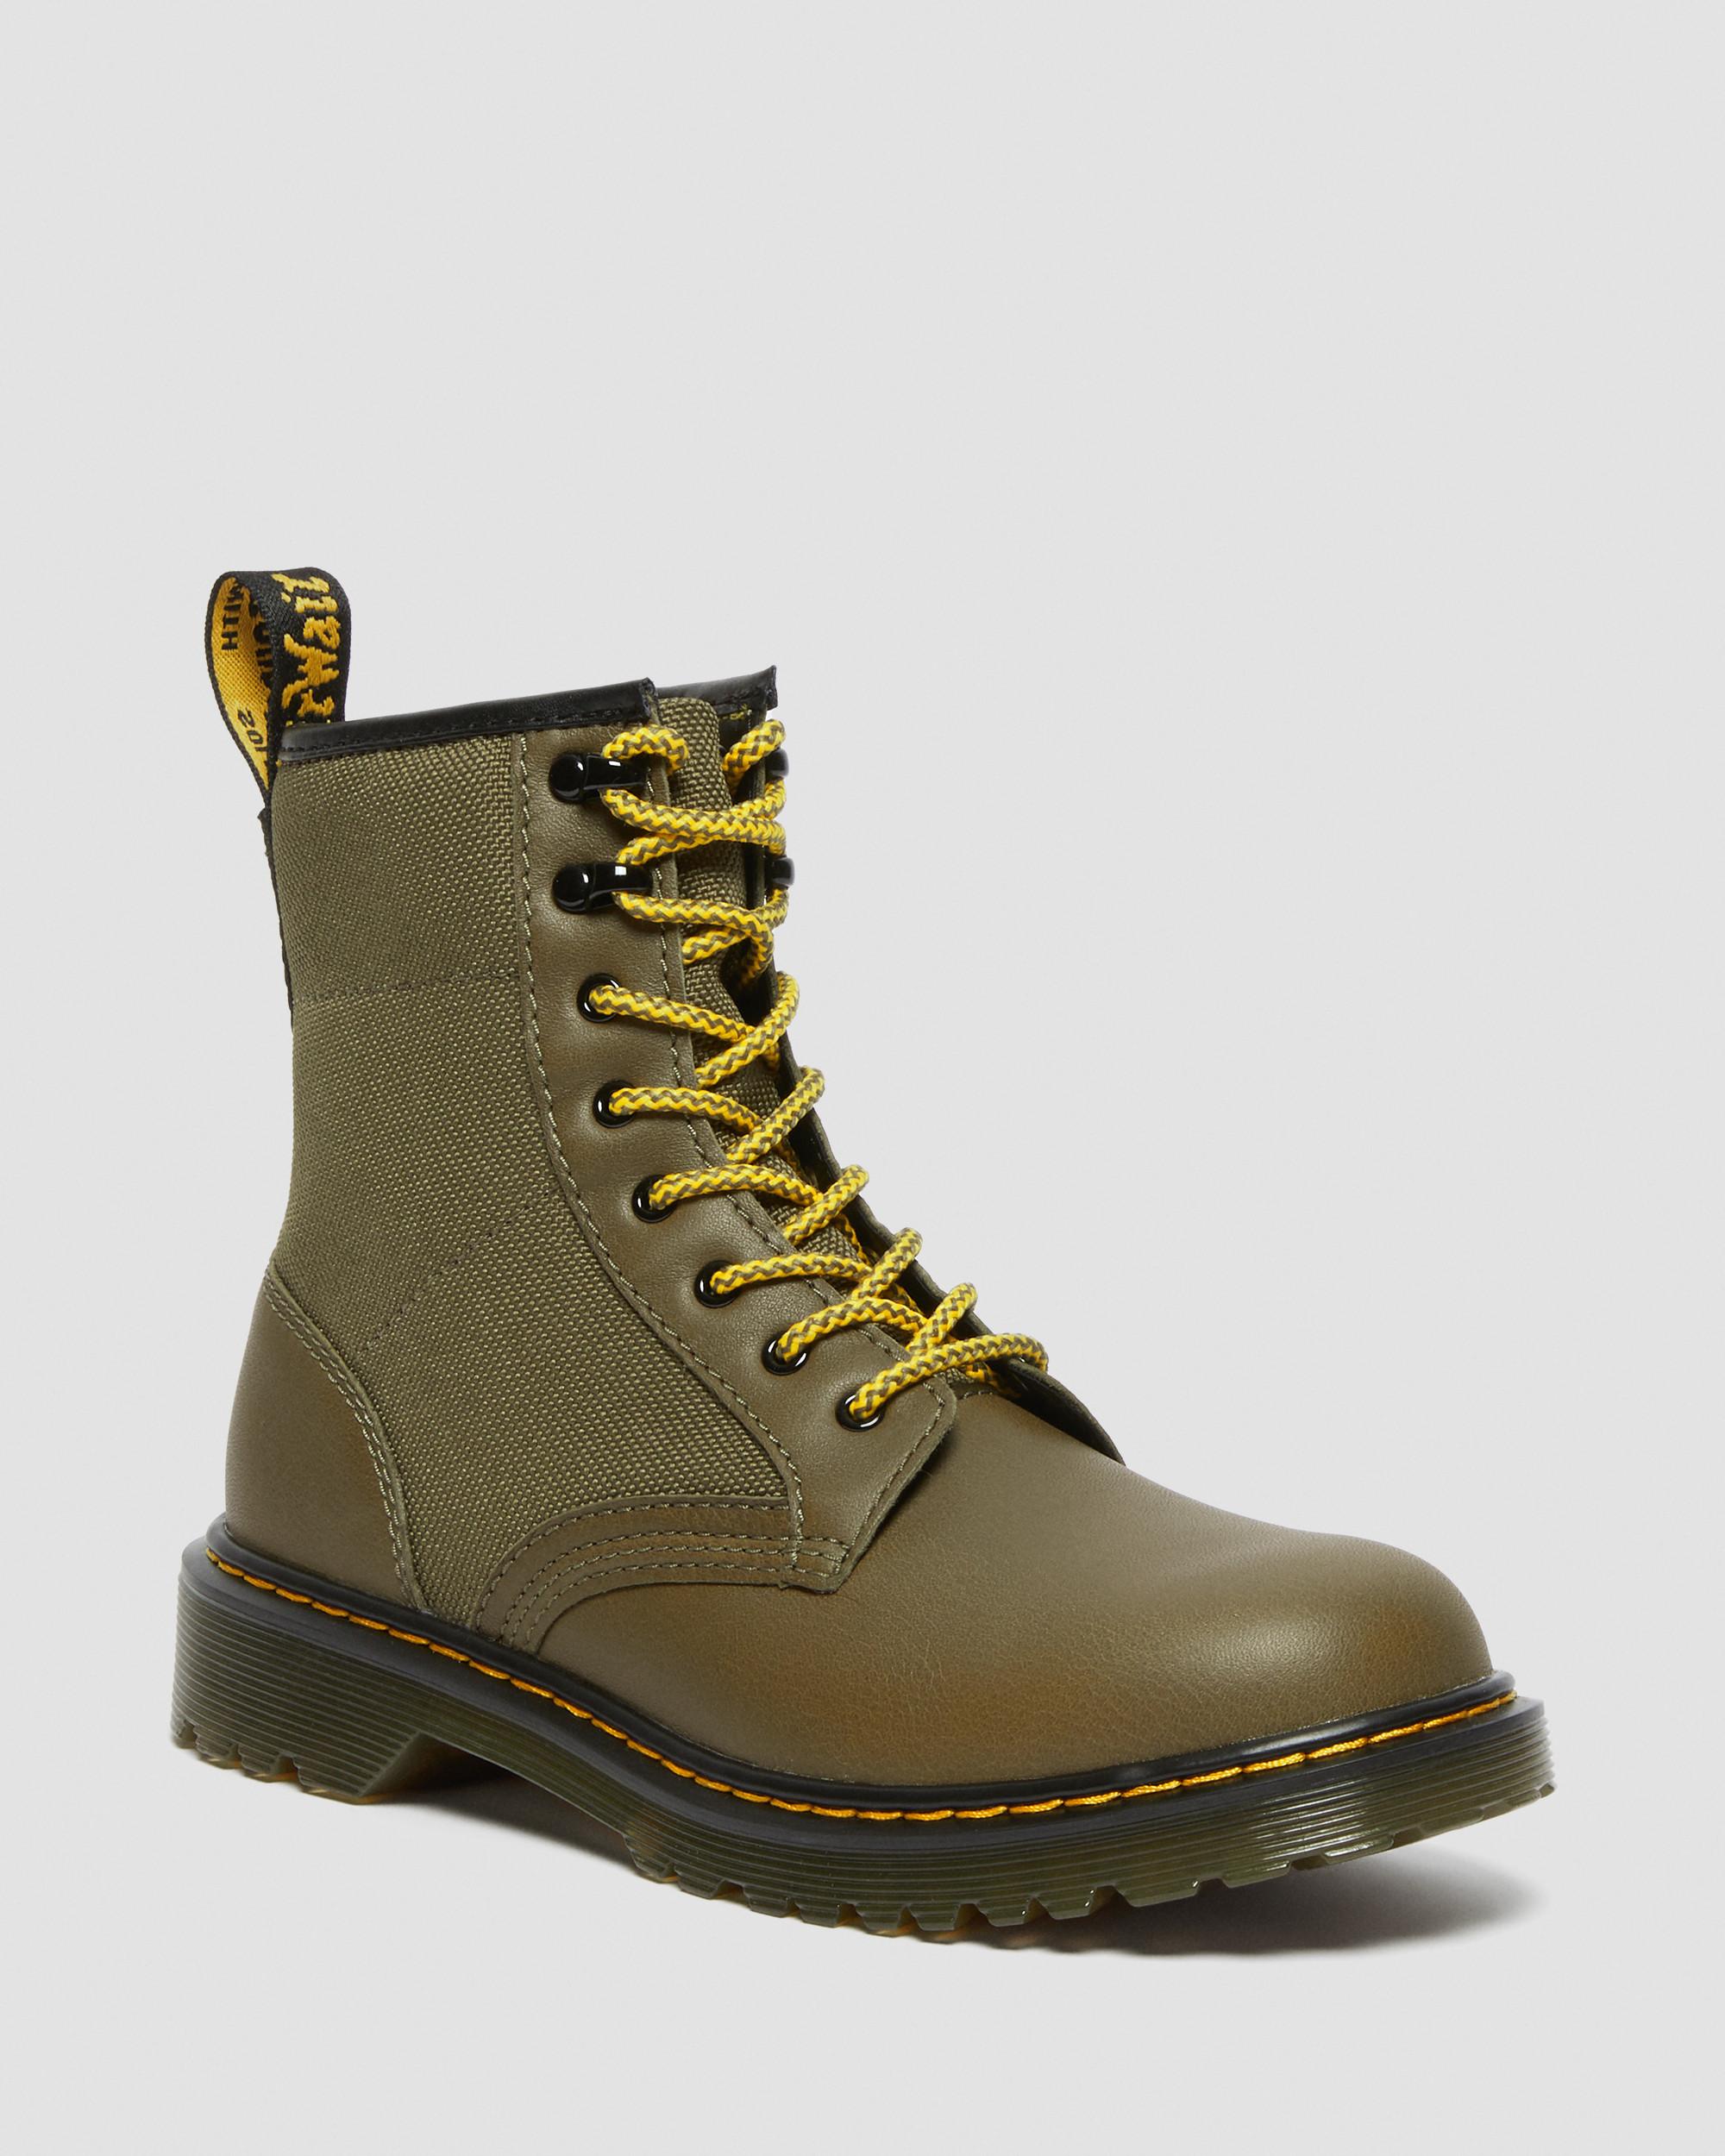 Youth 1460 Panel Leather Lace Up Boots, Olive | Dr. Martens